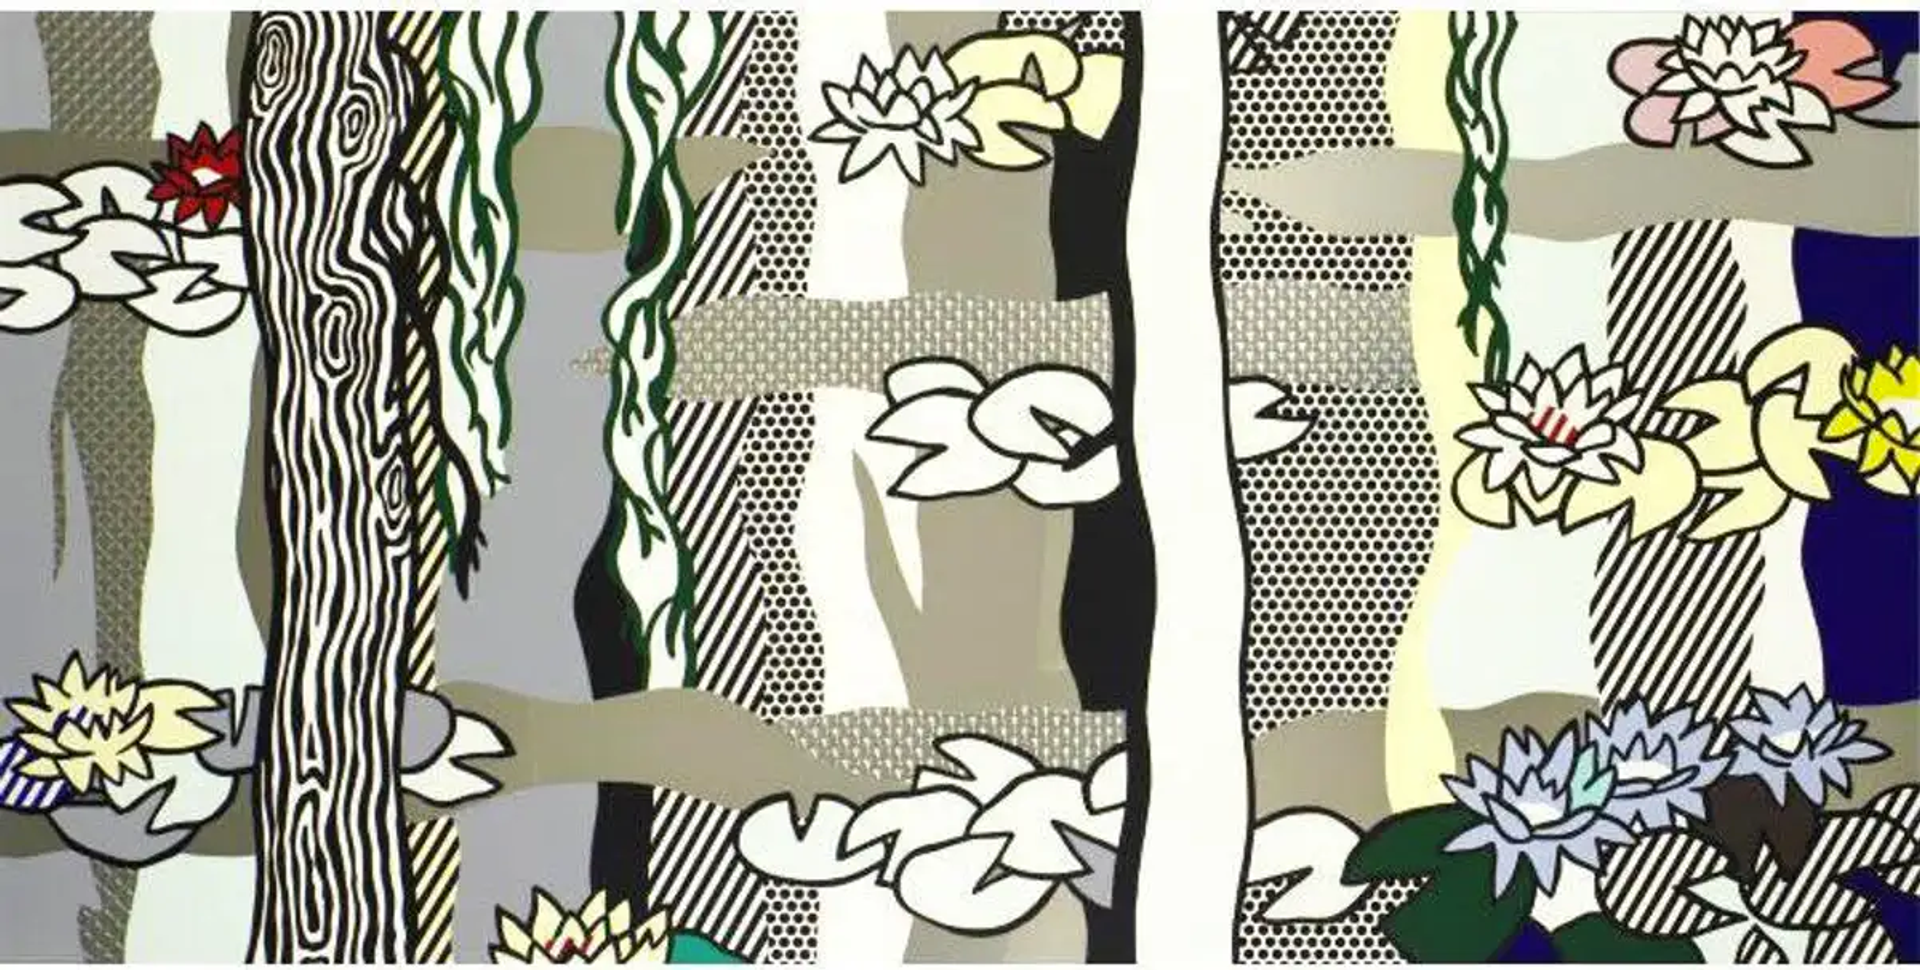 Water Lilies with Willows presents tree bark, lily pads, cascading willows and reflections, rendered in thick outlines, swirls, diagonal patterning, and Ben Day dots.